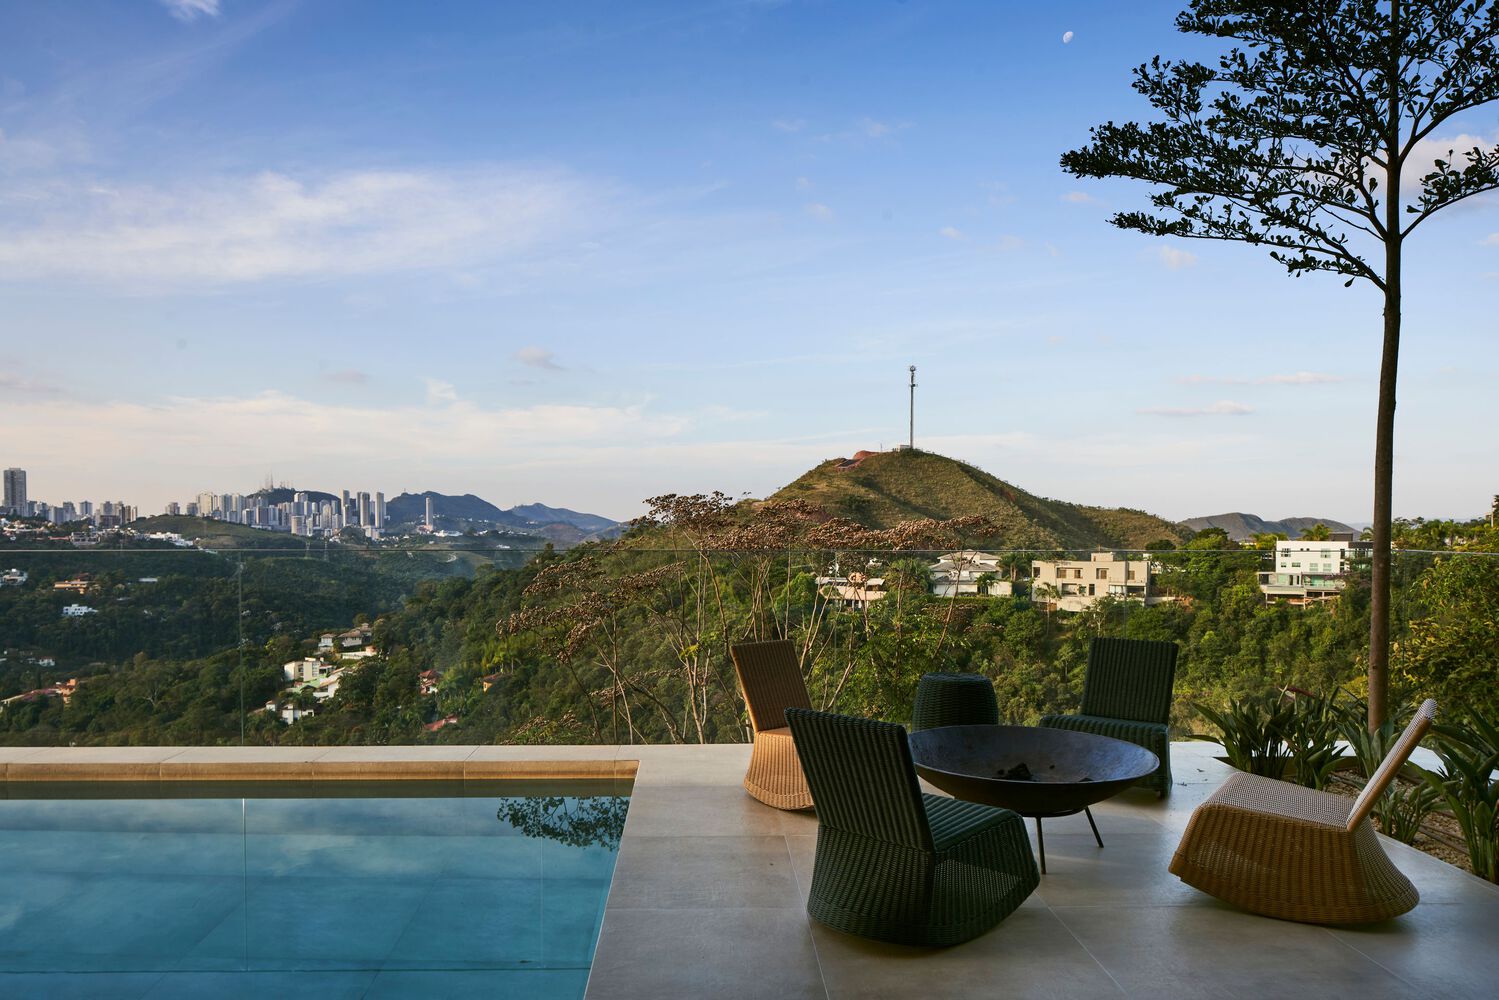 (pool area with views of the Serra do Curral mountains)